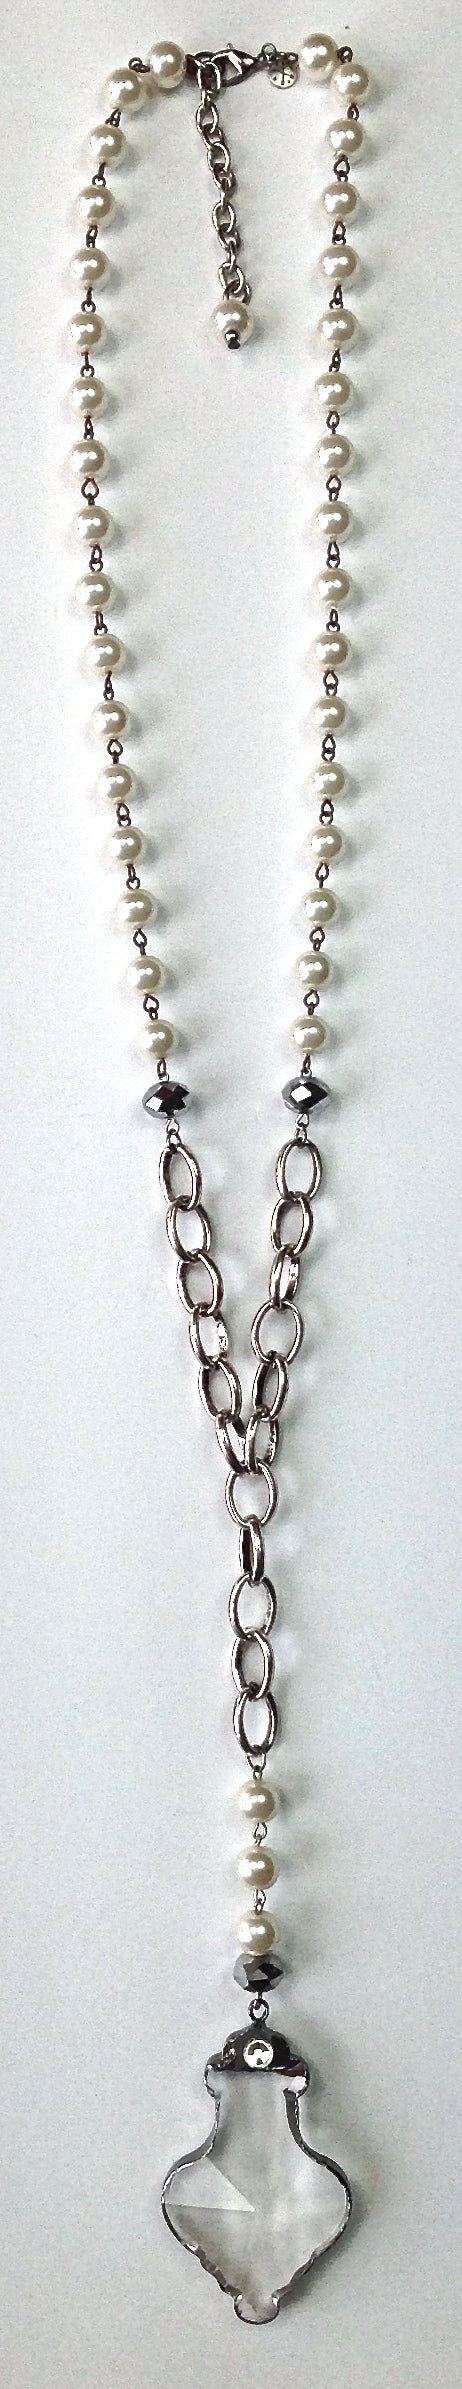 Lariat with Crystal Stone Statement Drop